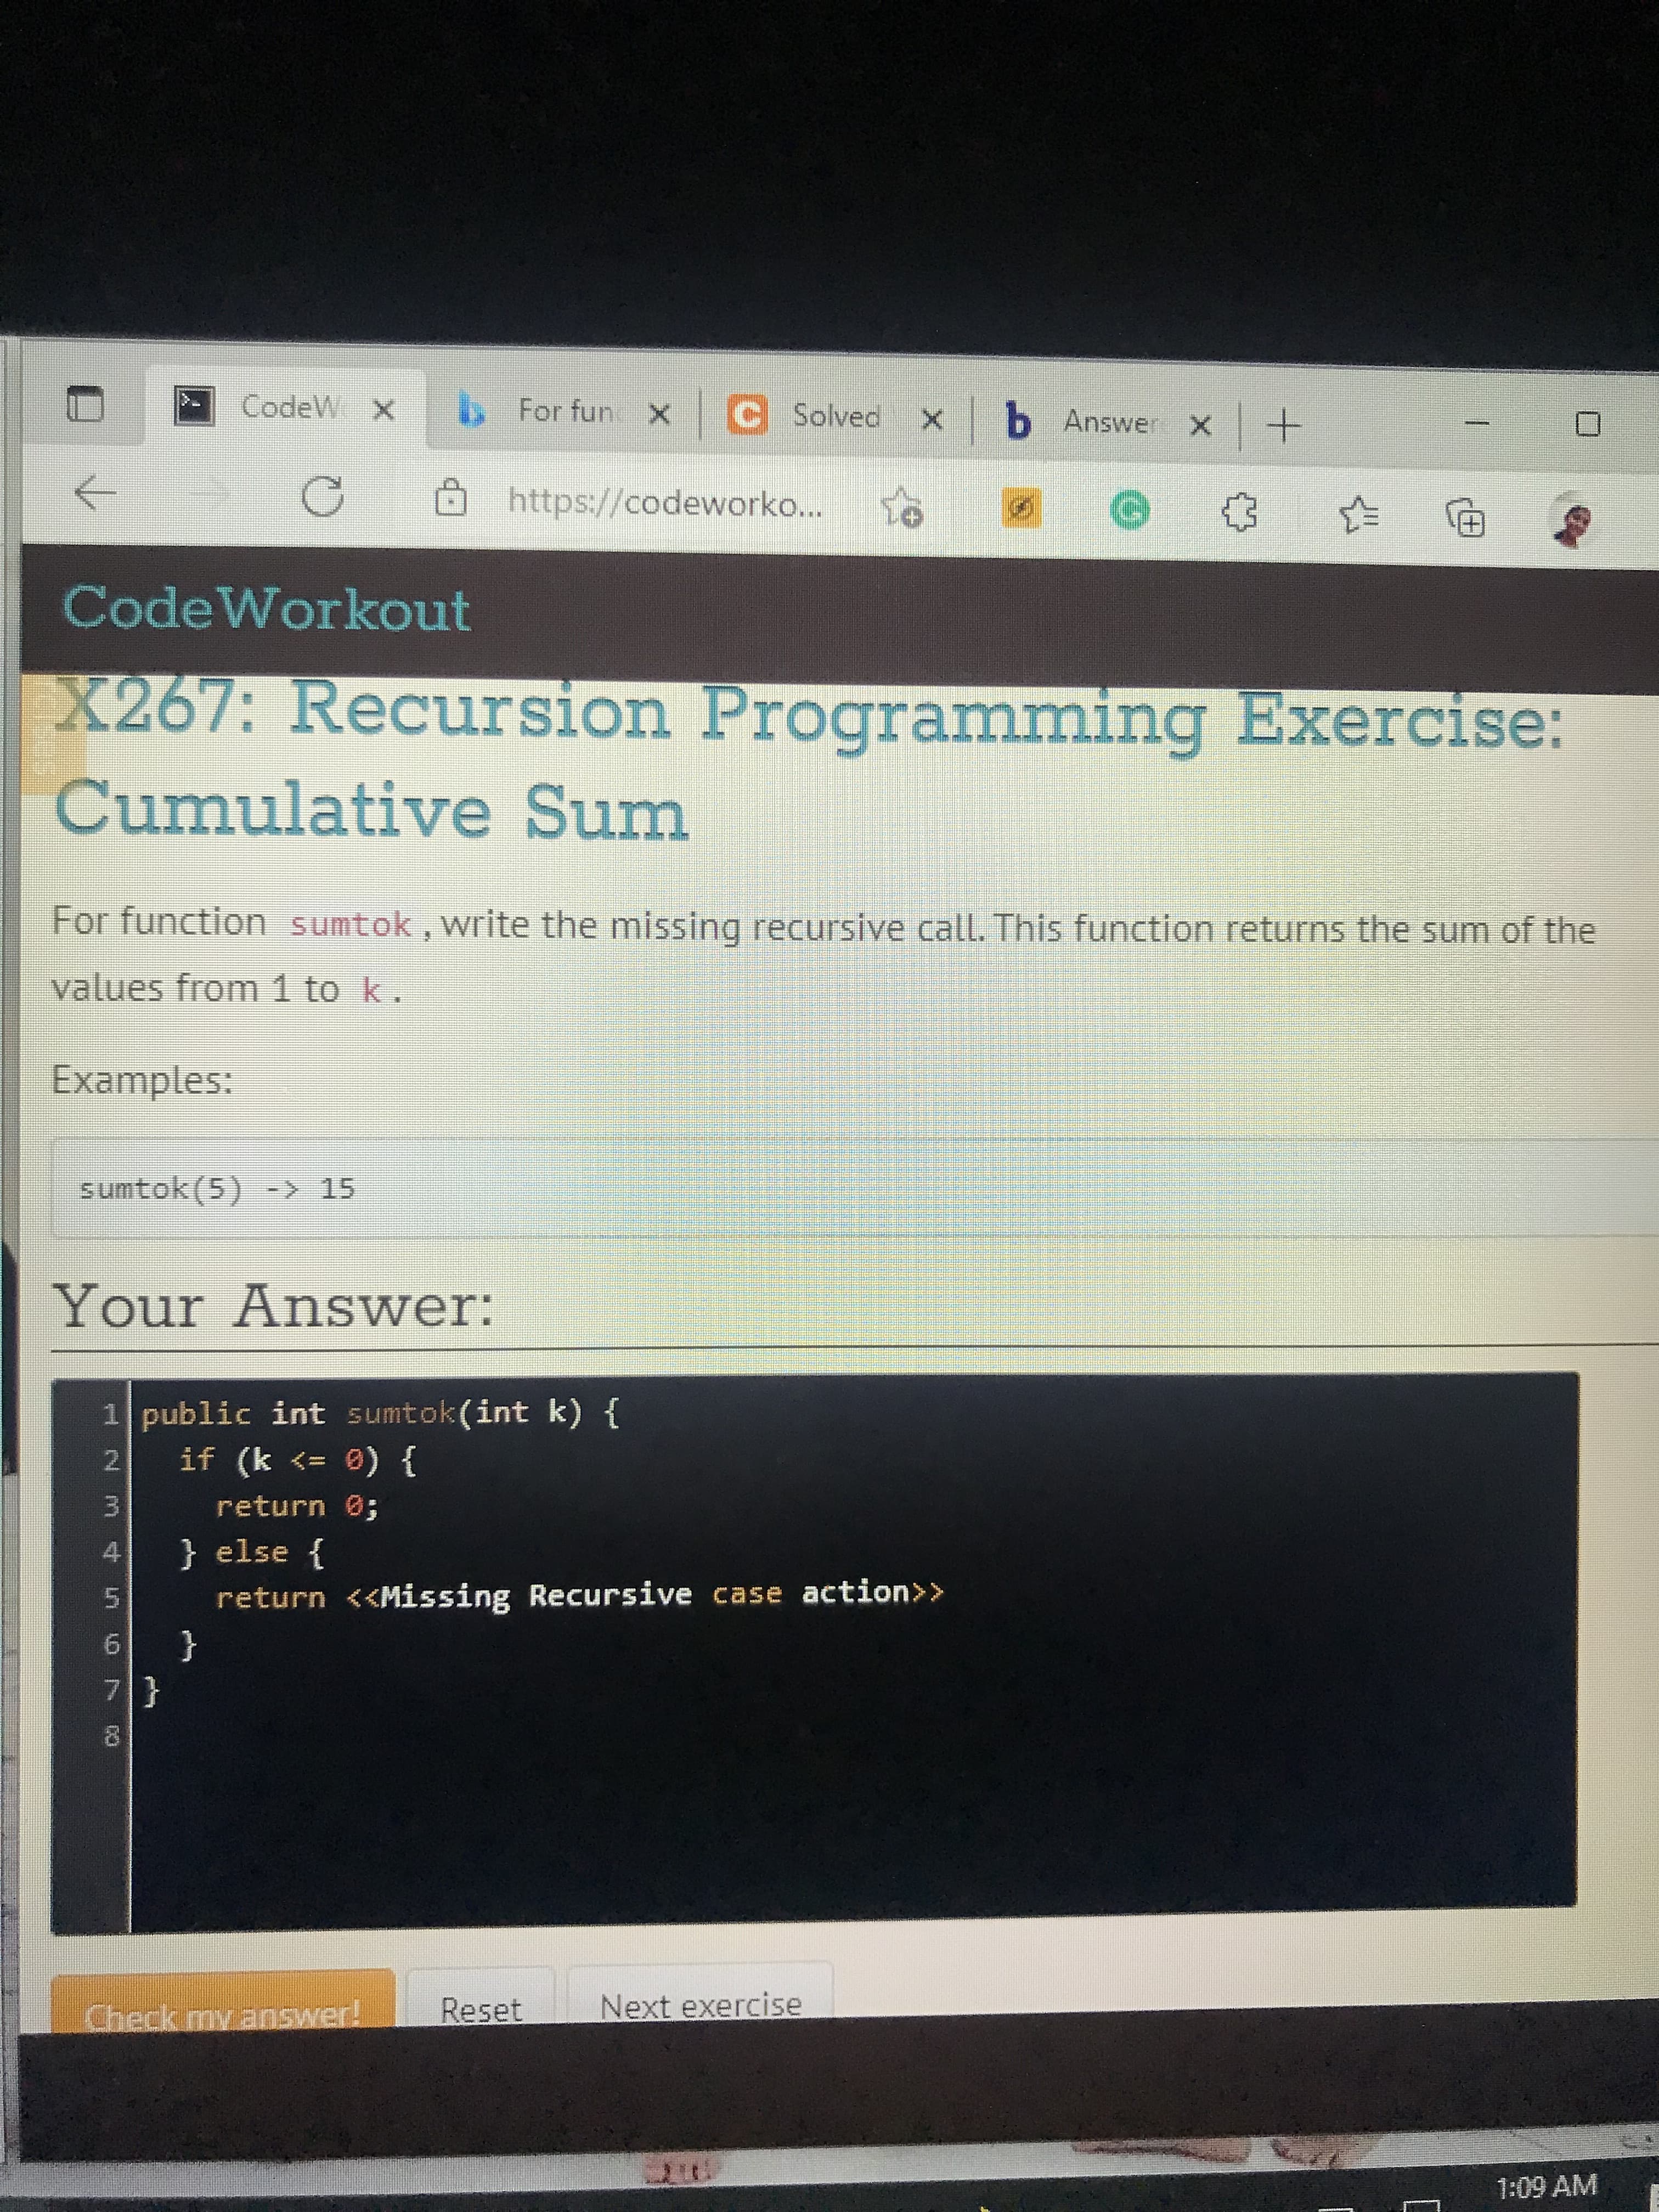 For funX
|C Solved xb Answer x+
CodeW X
https://codeworko...
田)
CodeWorkout
X267: Recursion Programming Exercise:
Cumulative Sum
For function sumtok, write the missing recursive call. This function returns the sum of the
values from1 to k.
Examples:
sumtok(5) -> 15
Your Answer:
1 public int sumtok(int k) {
2.
} (0 => )
return 0;
3.
} else {
return <<Missing Recursive case action>>
6.
{
Check my answer!
Reset
Next exercise
1:09 AM
